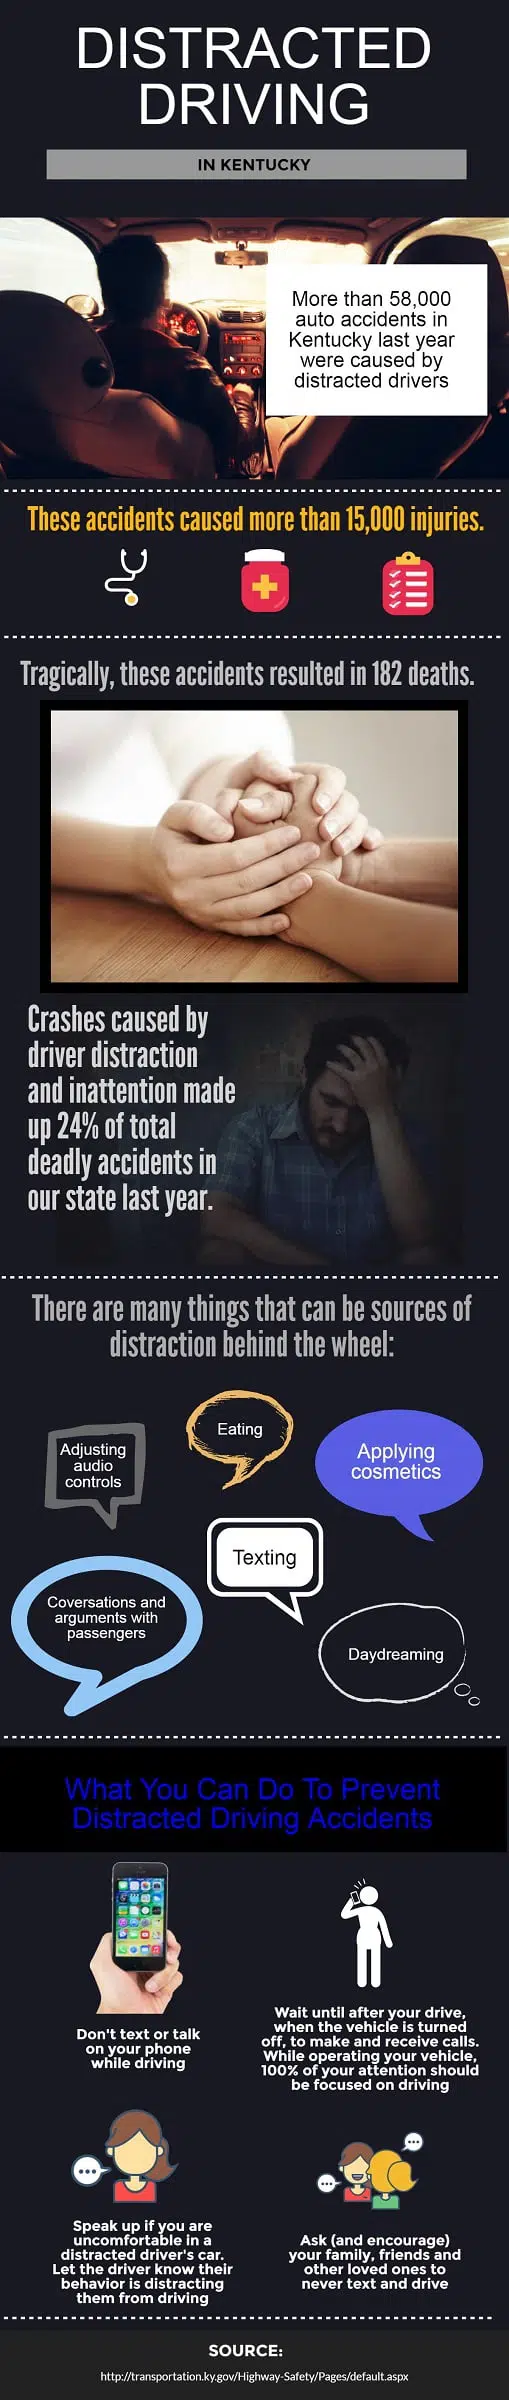 Distracted Driving in Kentucky Infographic